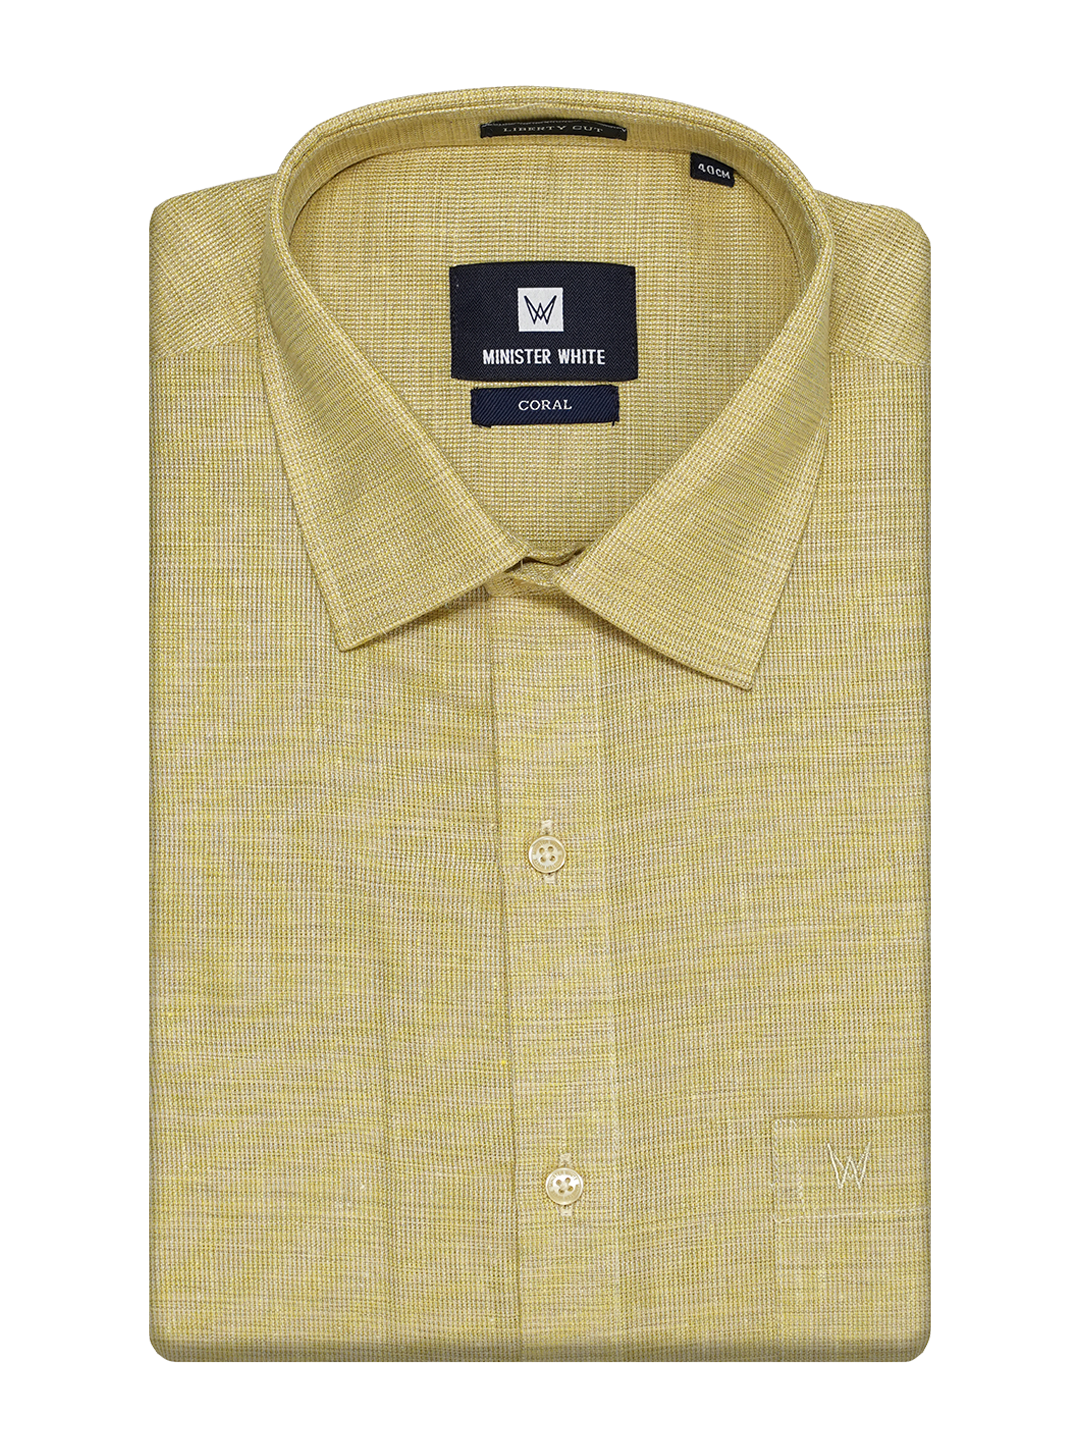 Mens Starch Cotton Olive Green Colour Regular Fit Shirt Coral